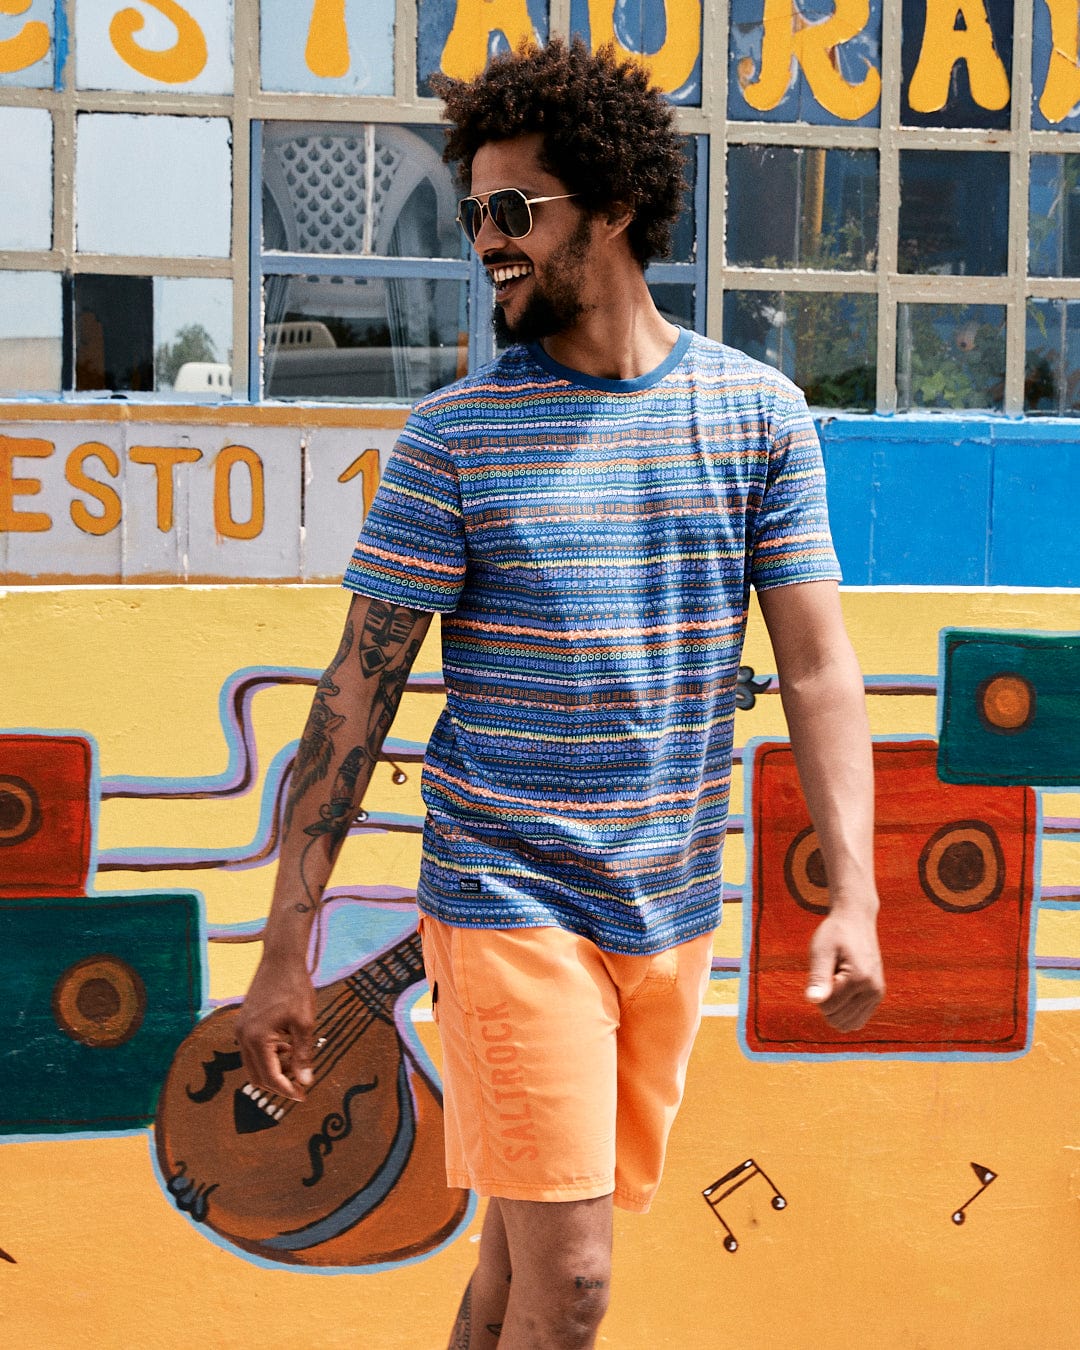 A man with curly hair, wearing sunglasses, smiles as he walks by a colorful mural featuring musical elements. He wears a striped t-shirt with Saltrock branding and orange Marks Mens Short Sleeve T-Shirt - Purple shorts.